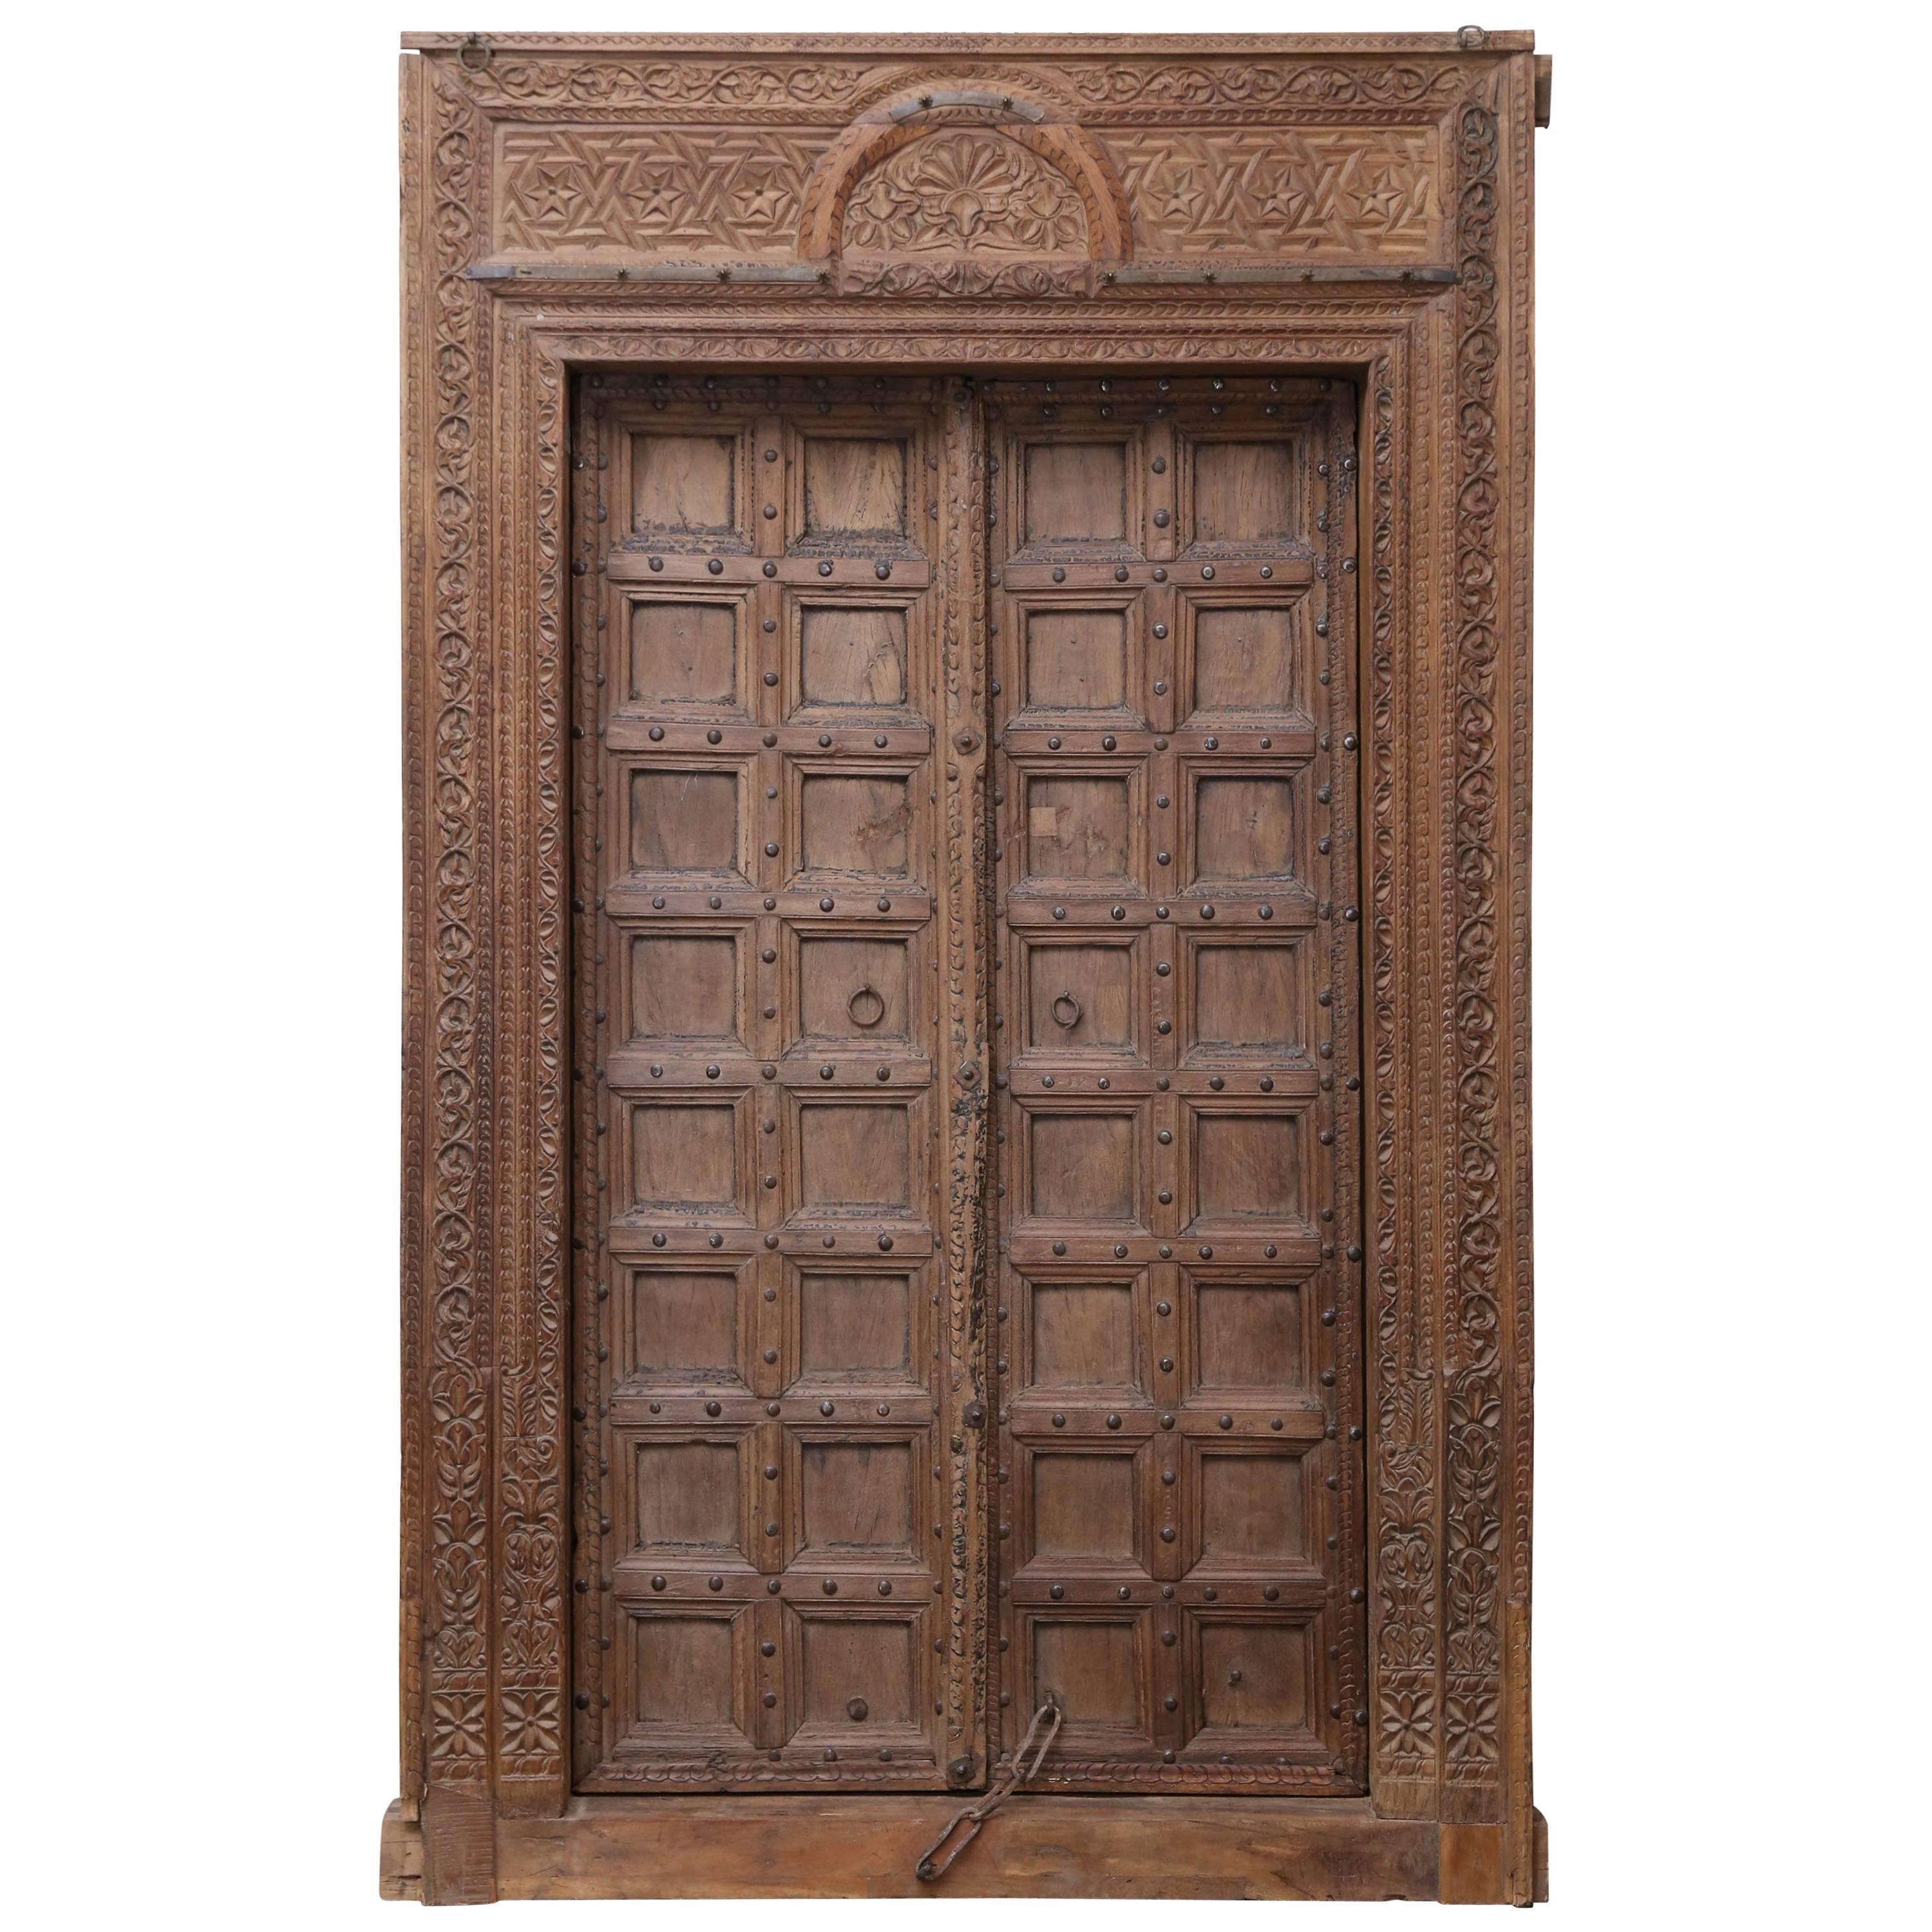 1820s Monumental Solid Teak Wood Entry Door from a Fortress For Sale